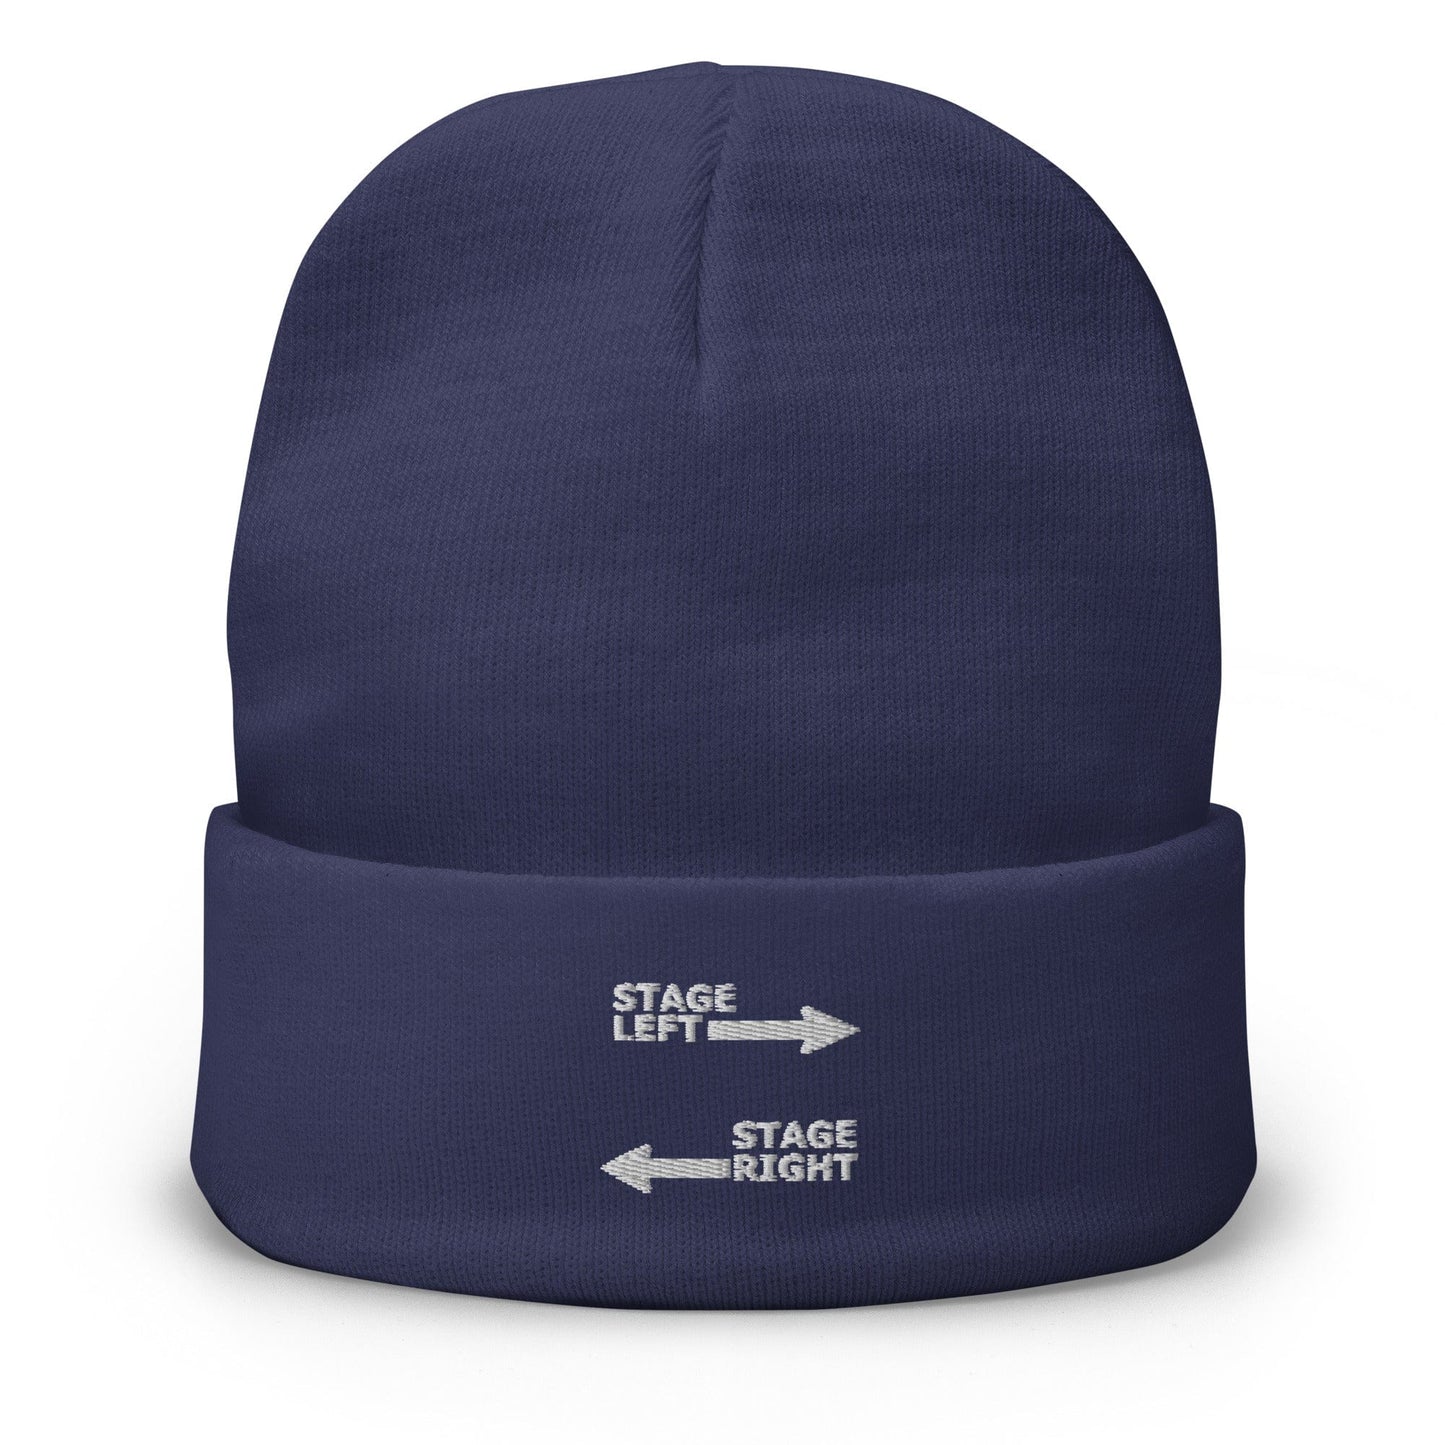 Production Apparel Stage Left - Stage Right Beanie Navy